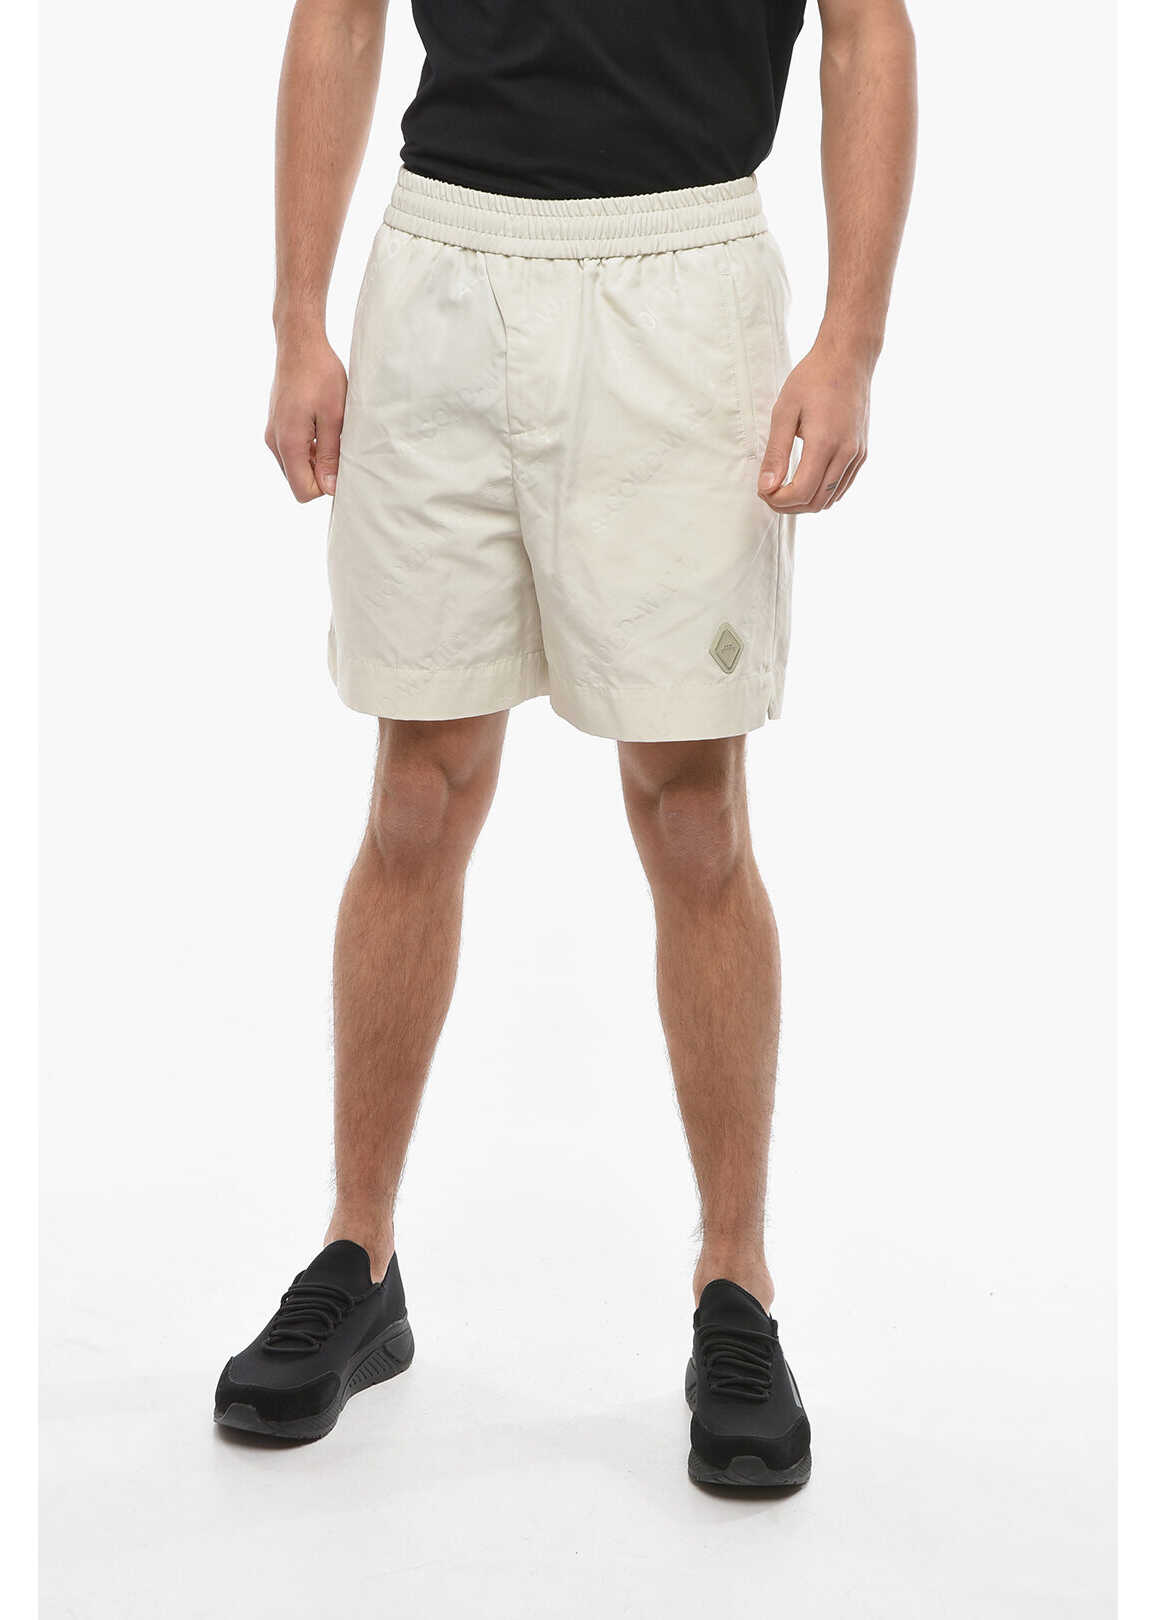 A-COLD-WALL* All Over Logo 3 Pockets Nylon Shorts Beige